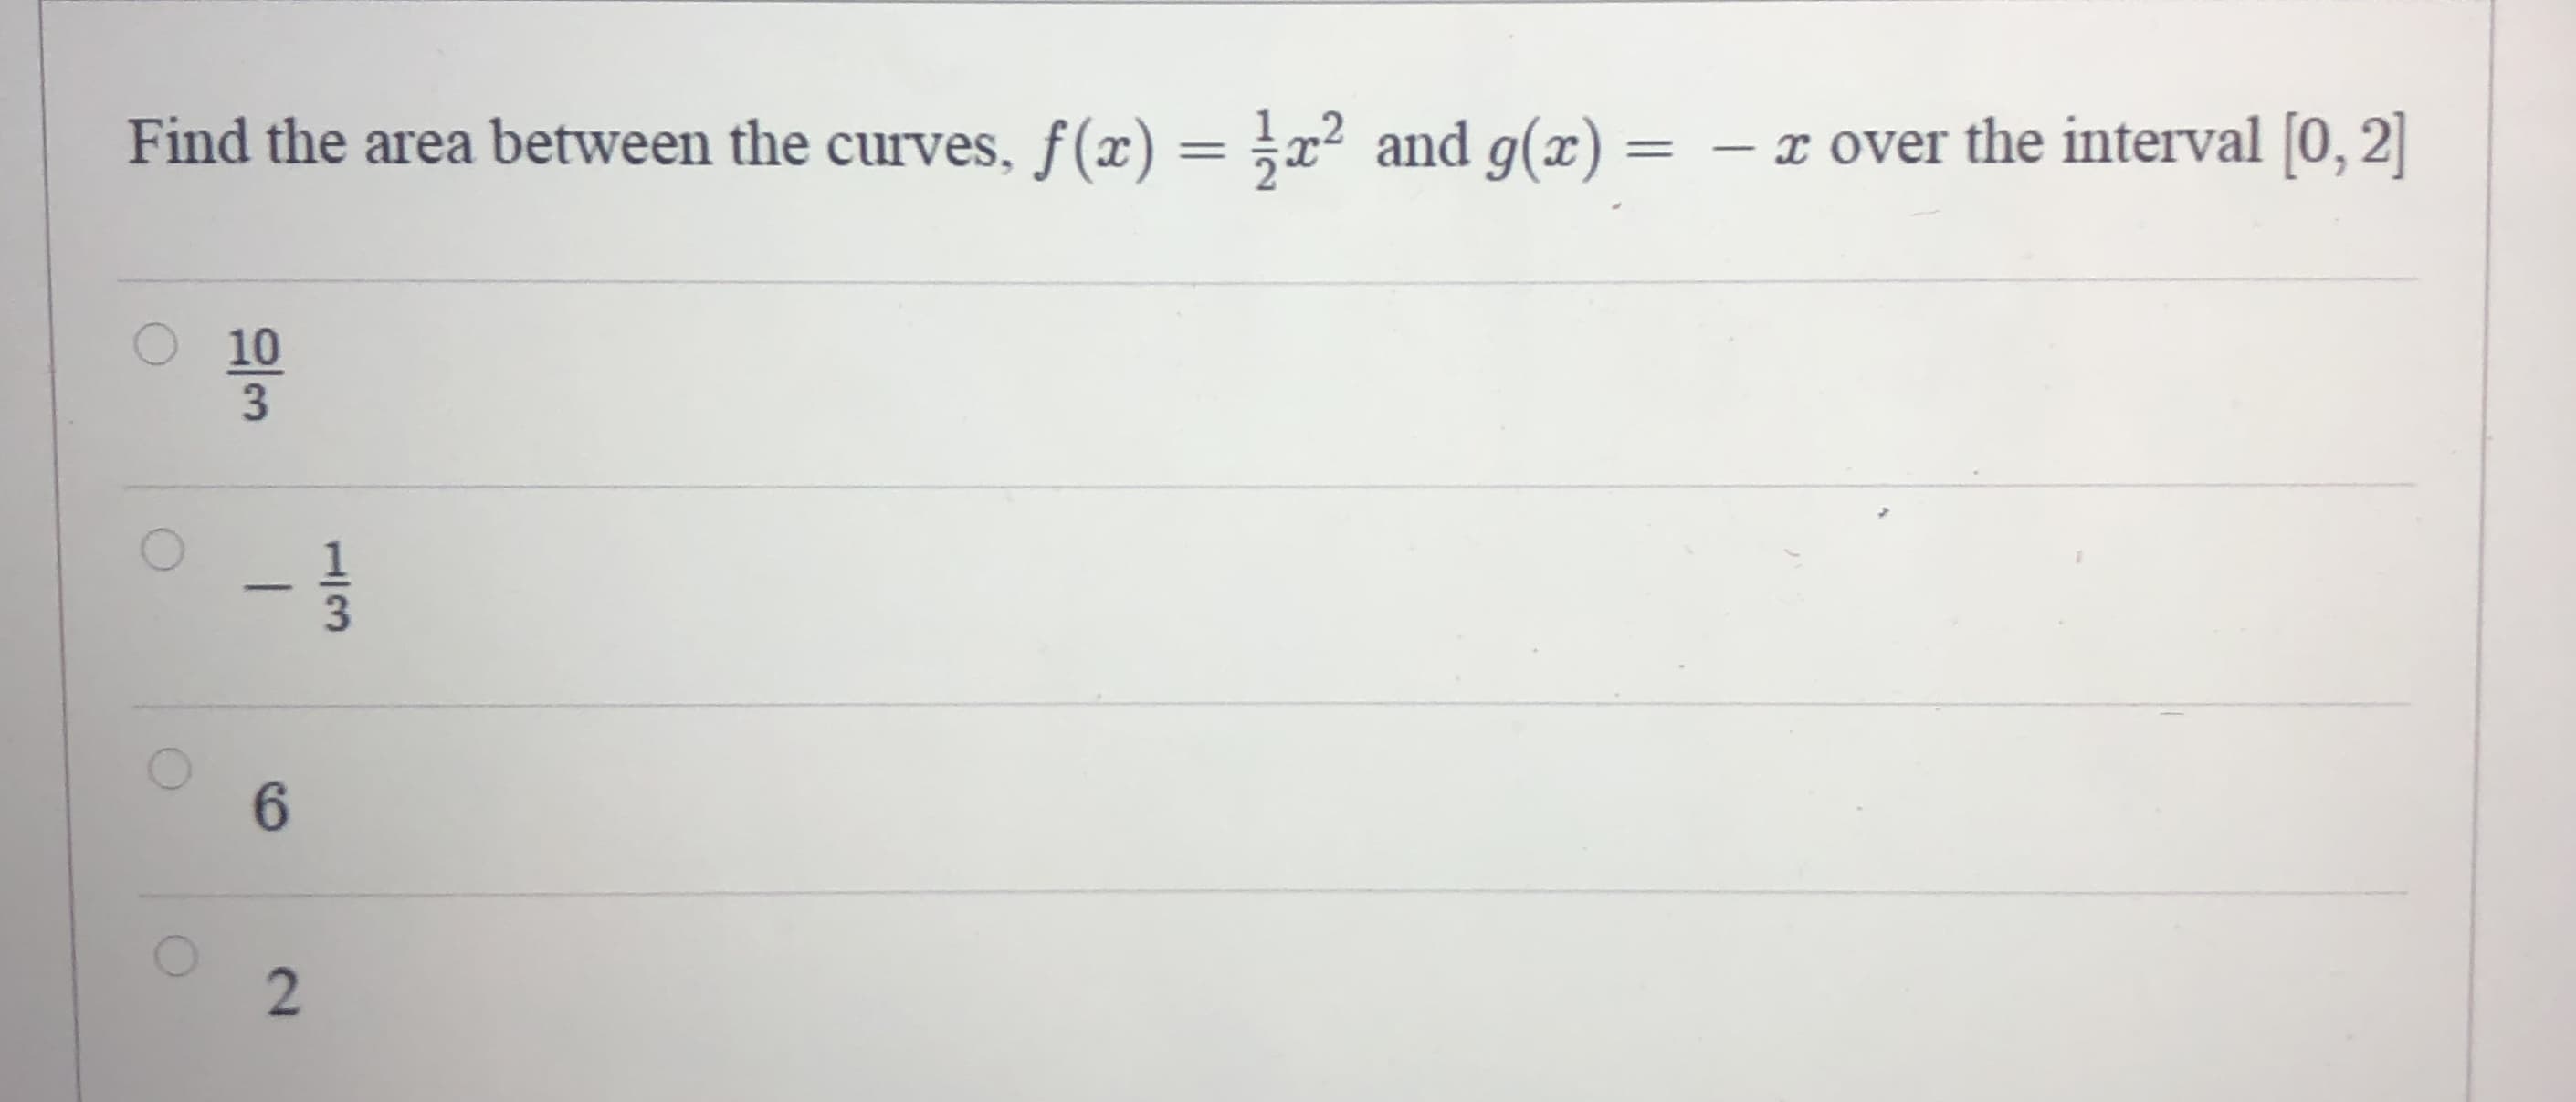 Find the area between the curves, f(x) = ;x² and g(x) :
- x over the interval [0, 2]
10
3
-
1/3
2.
